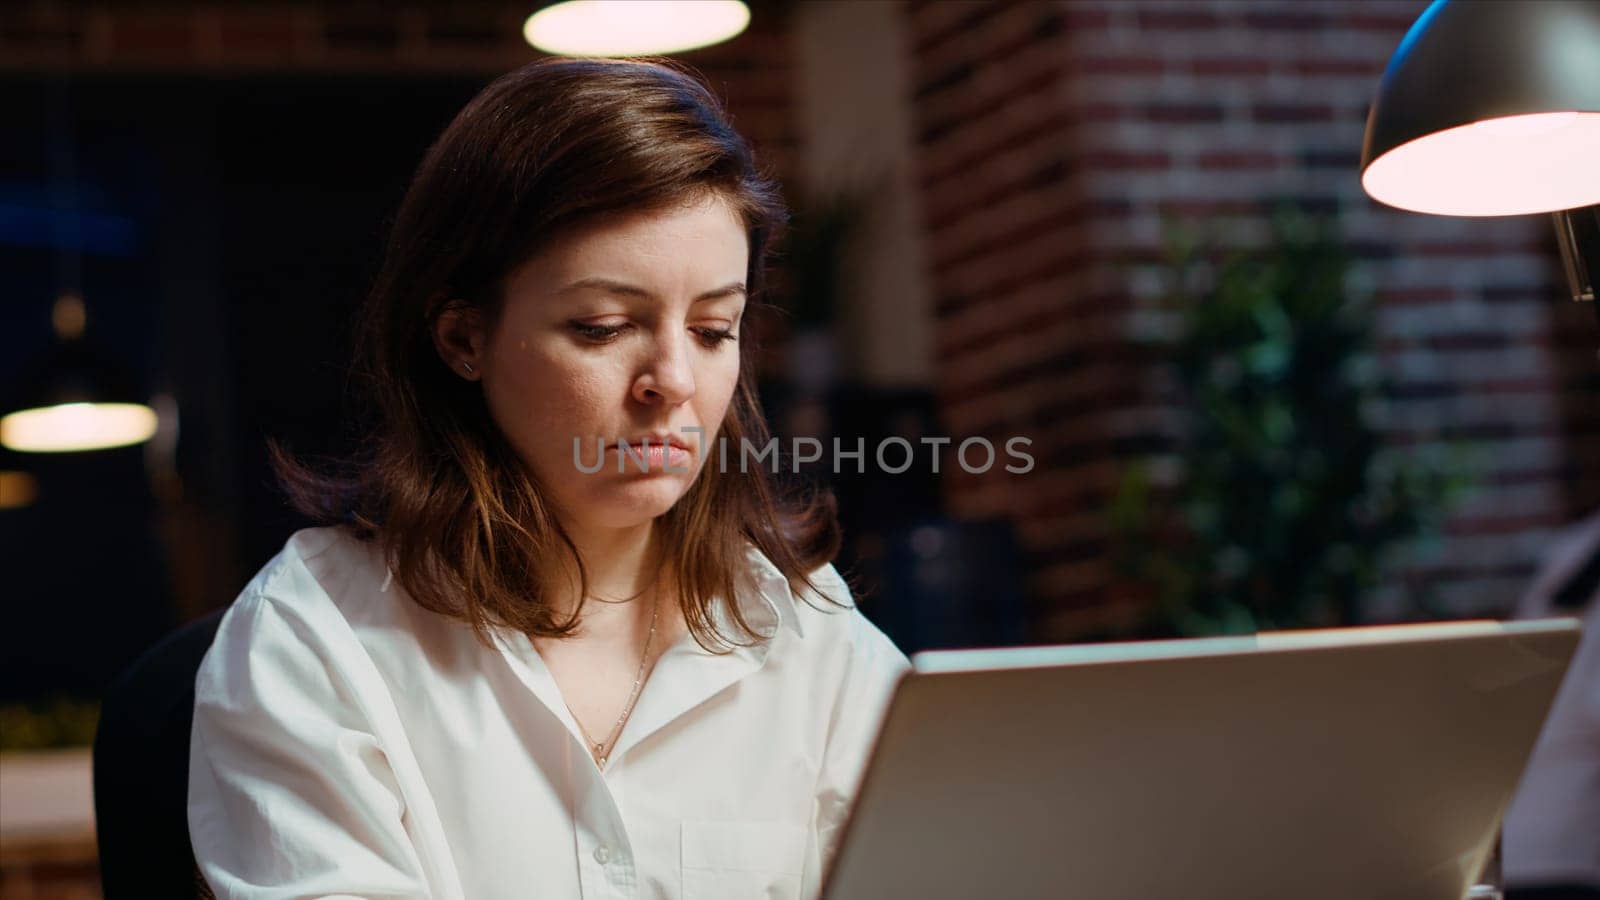 Businesswoman researching key data for company project, doing tasks in office overnight. Employee looking over accounting figures on laptop screen late at night, typing on keyboard, camera B